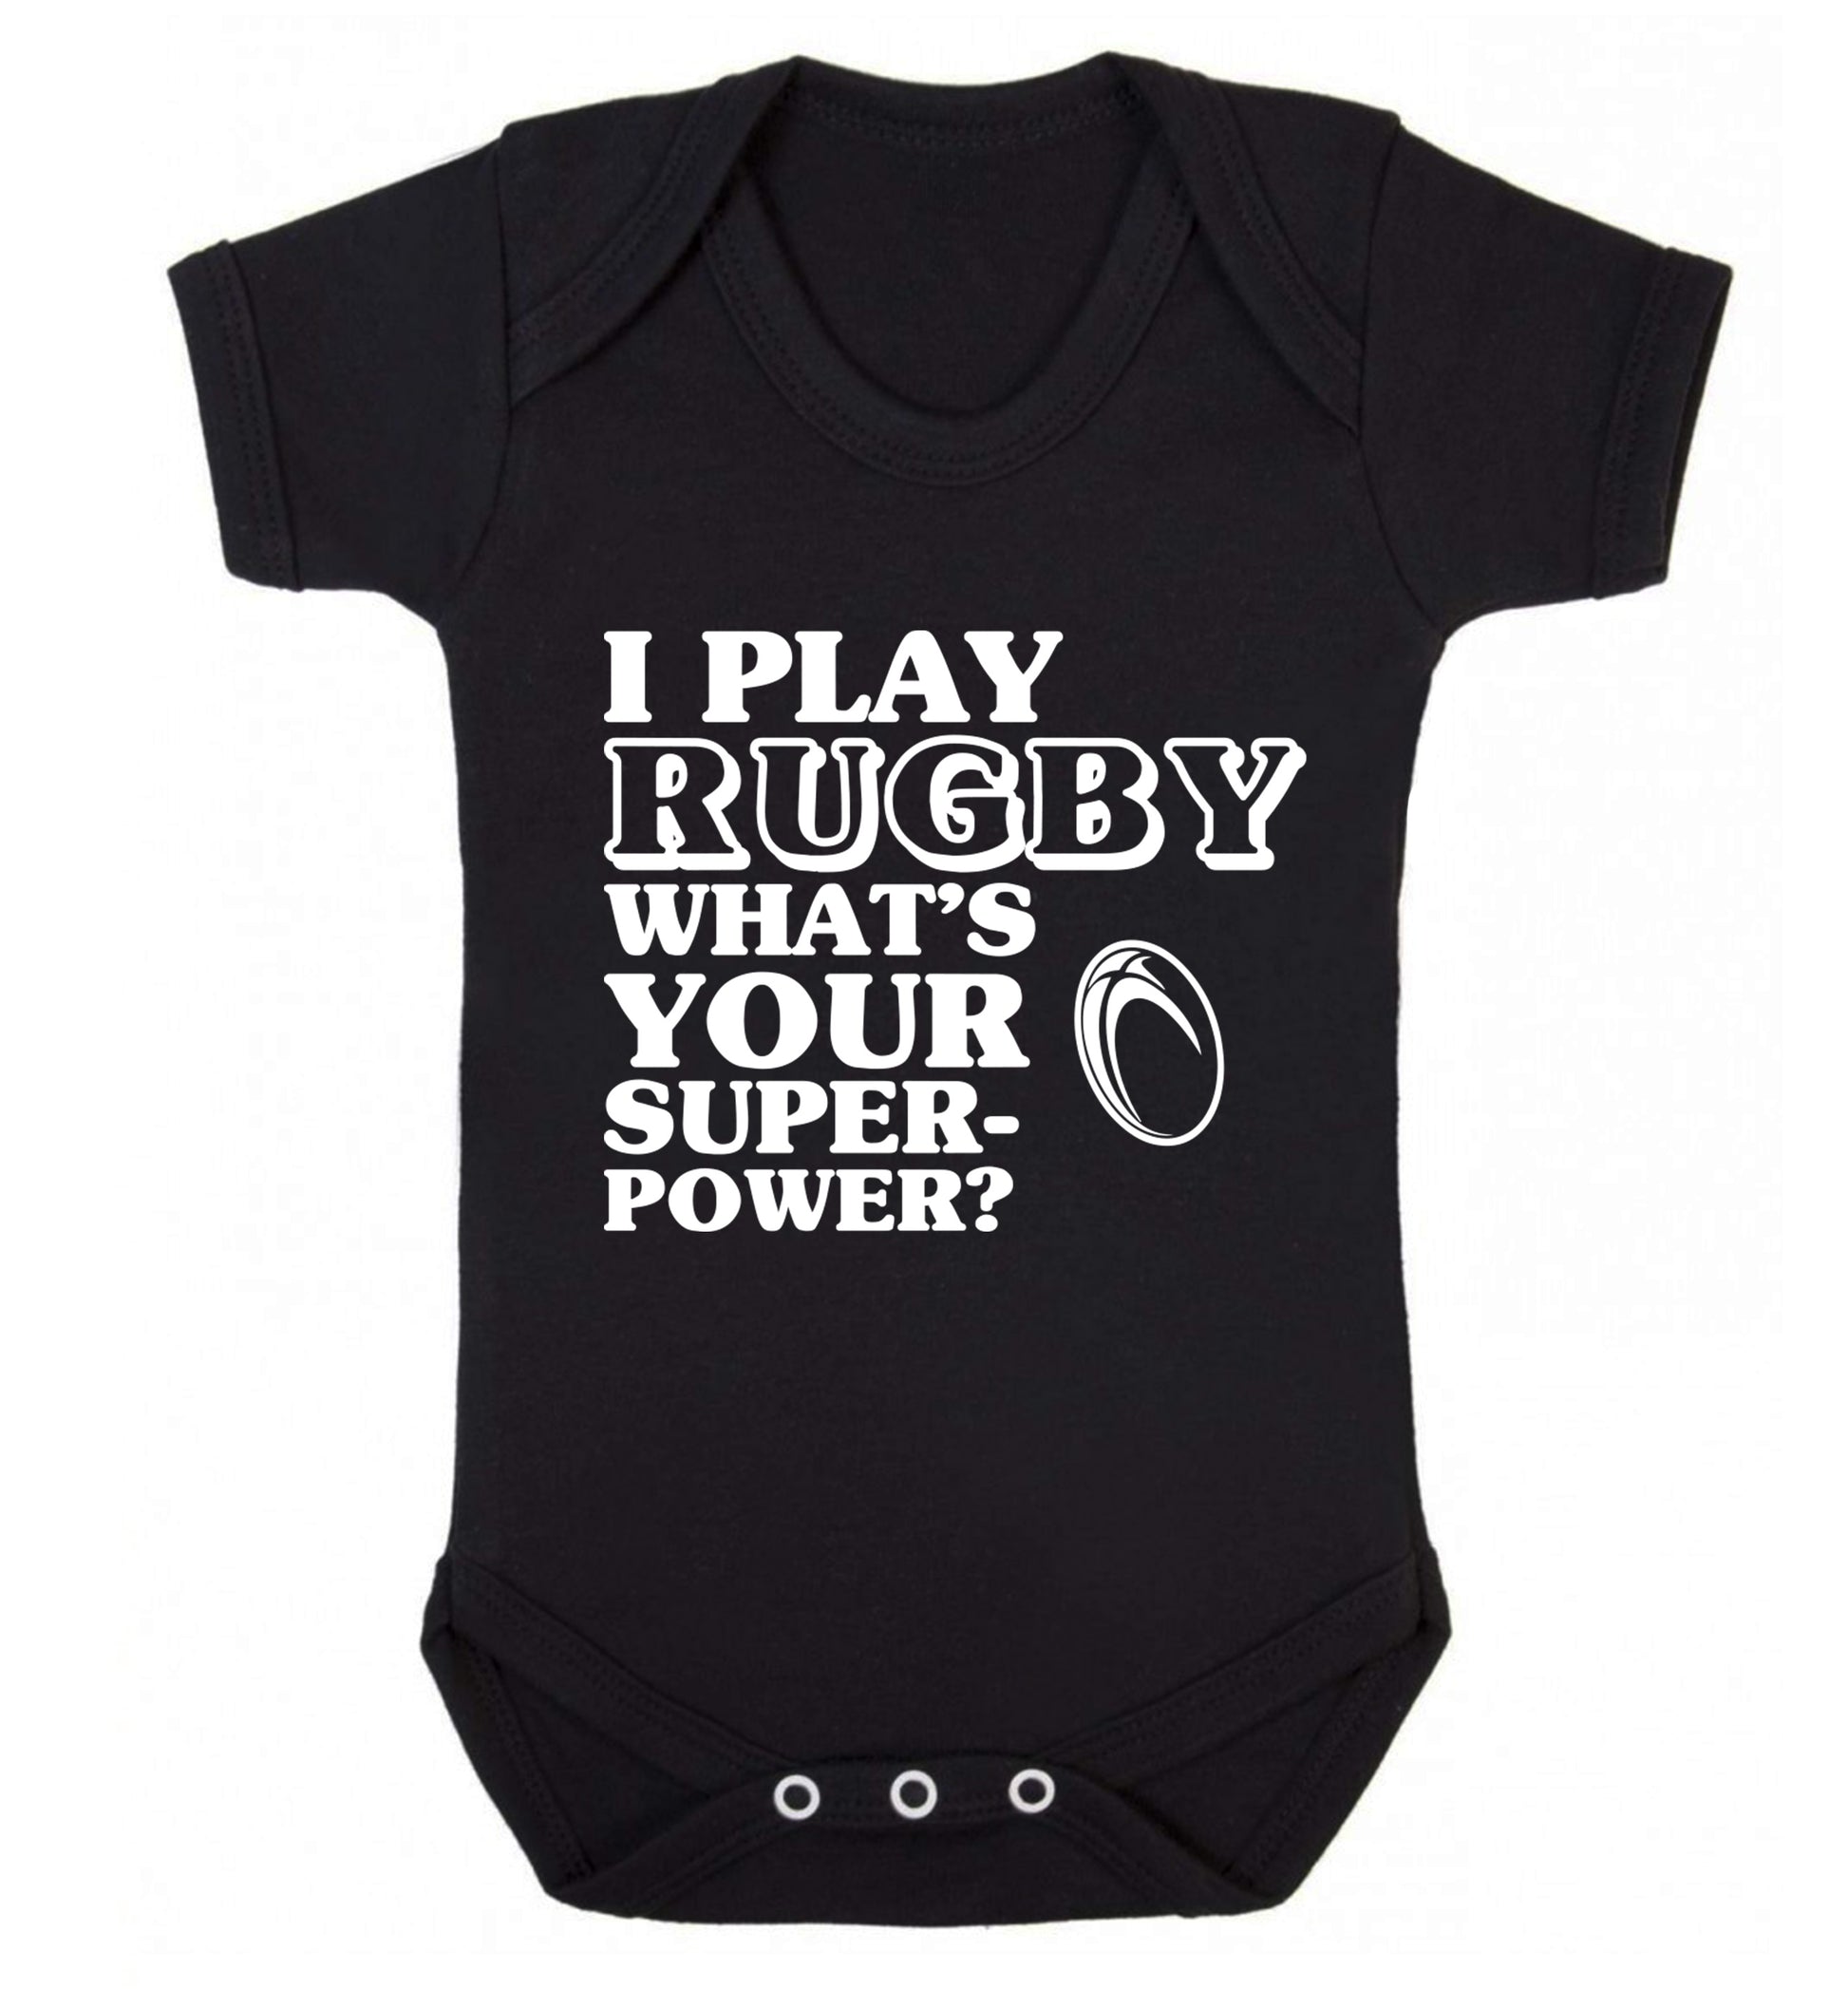 I play rugby what's your superpower? Baby Vest black 18-24 months